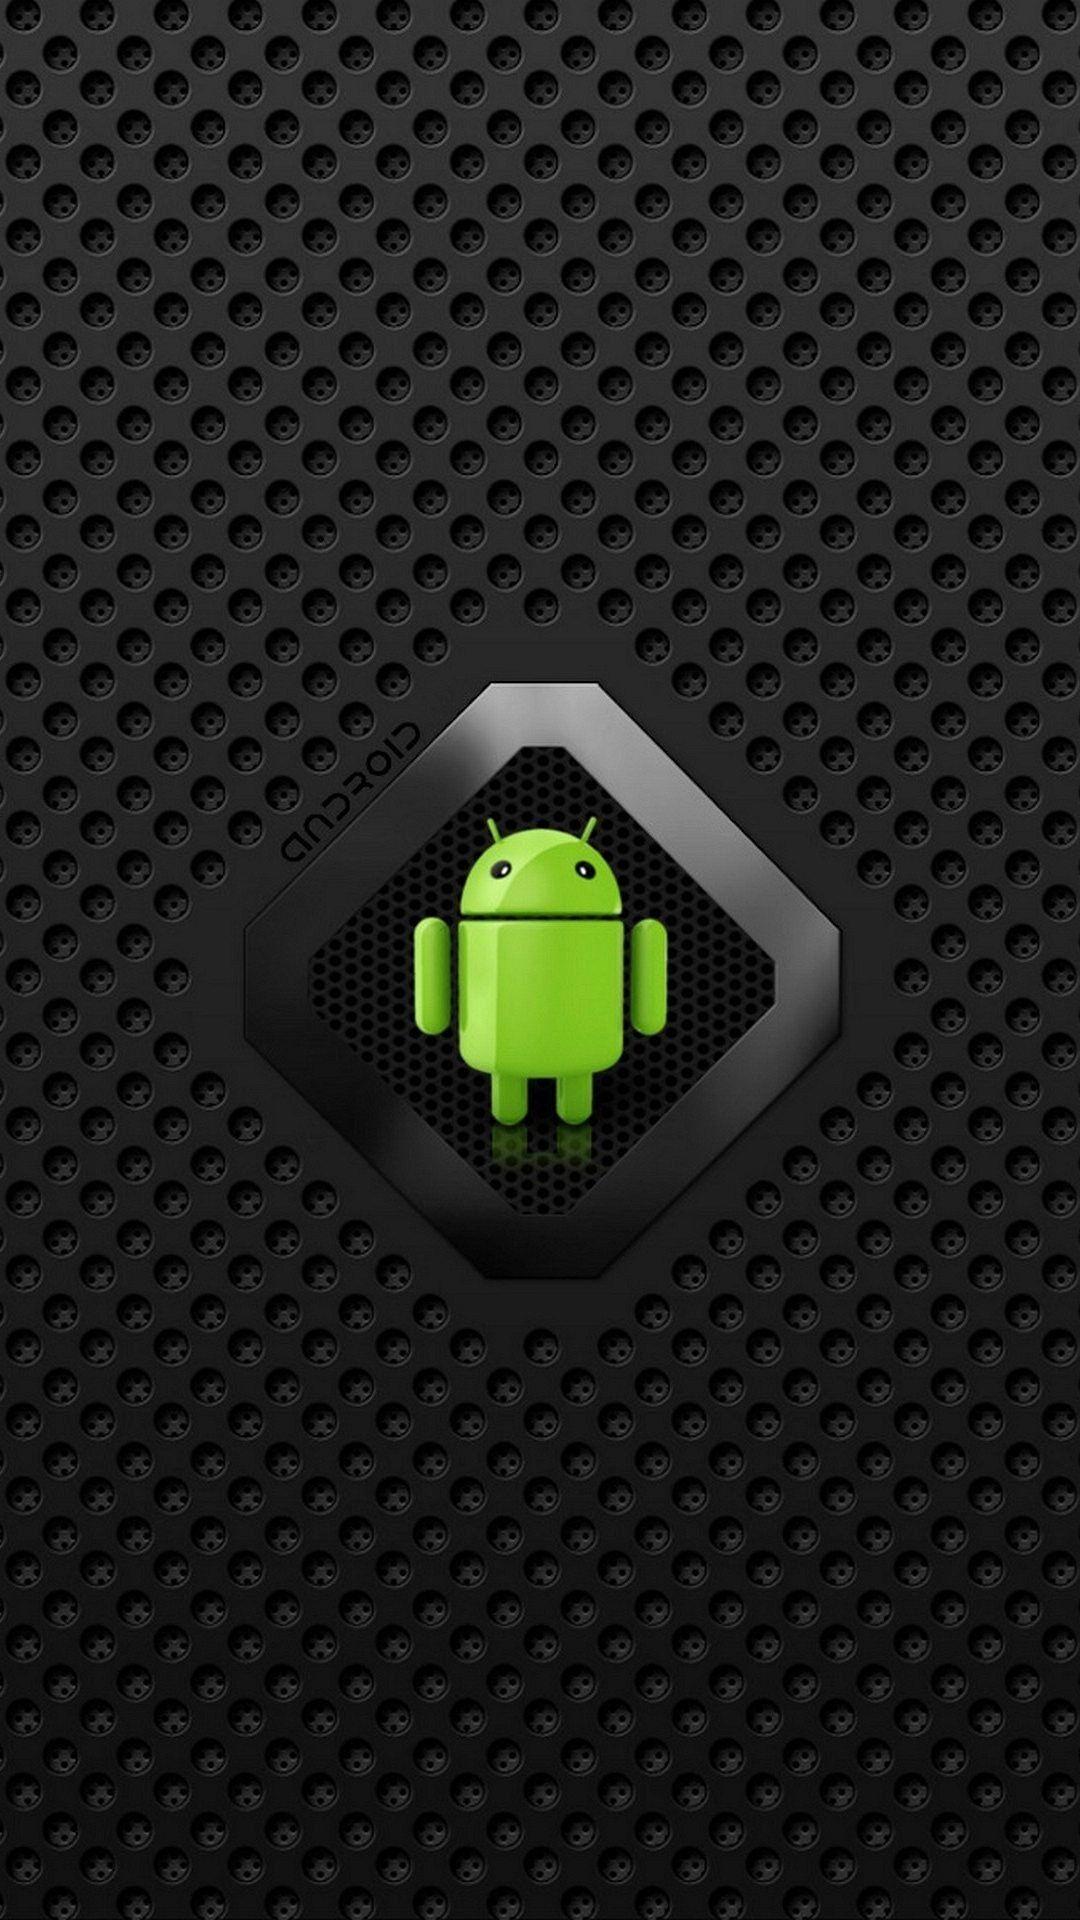 Android Wallpapers Full HD - Wallpaper Cave